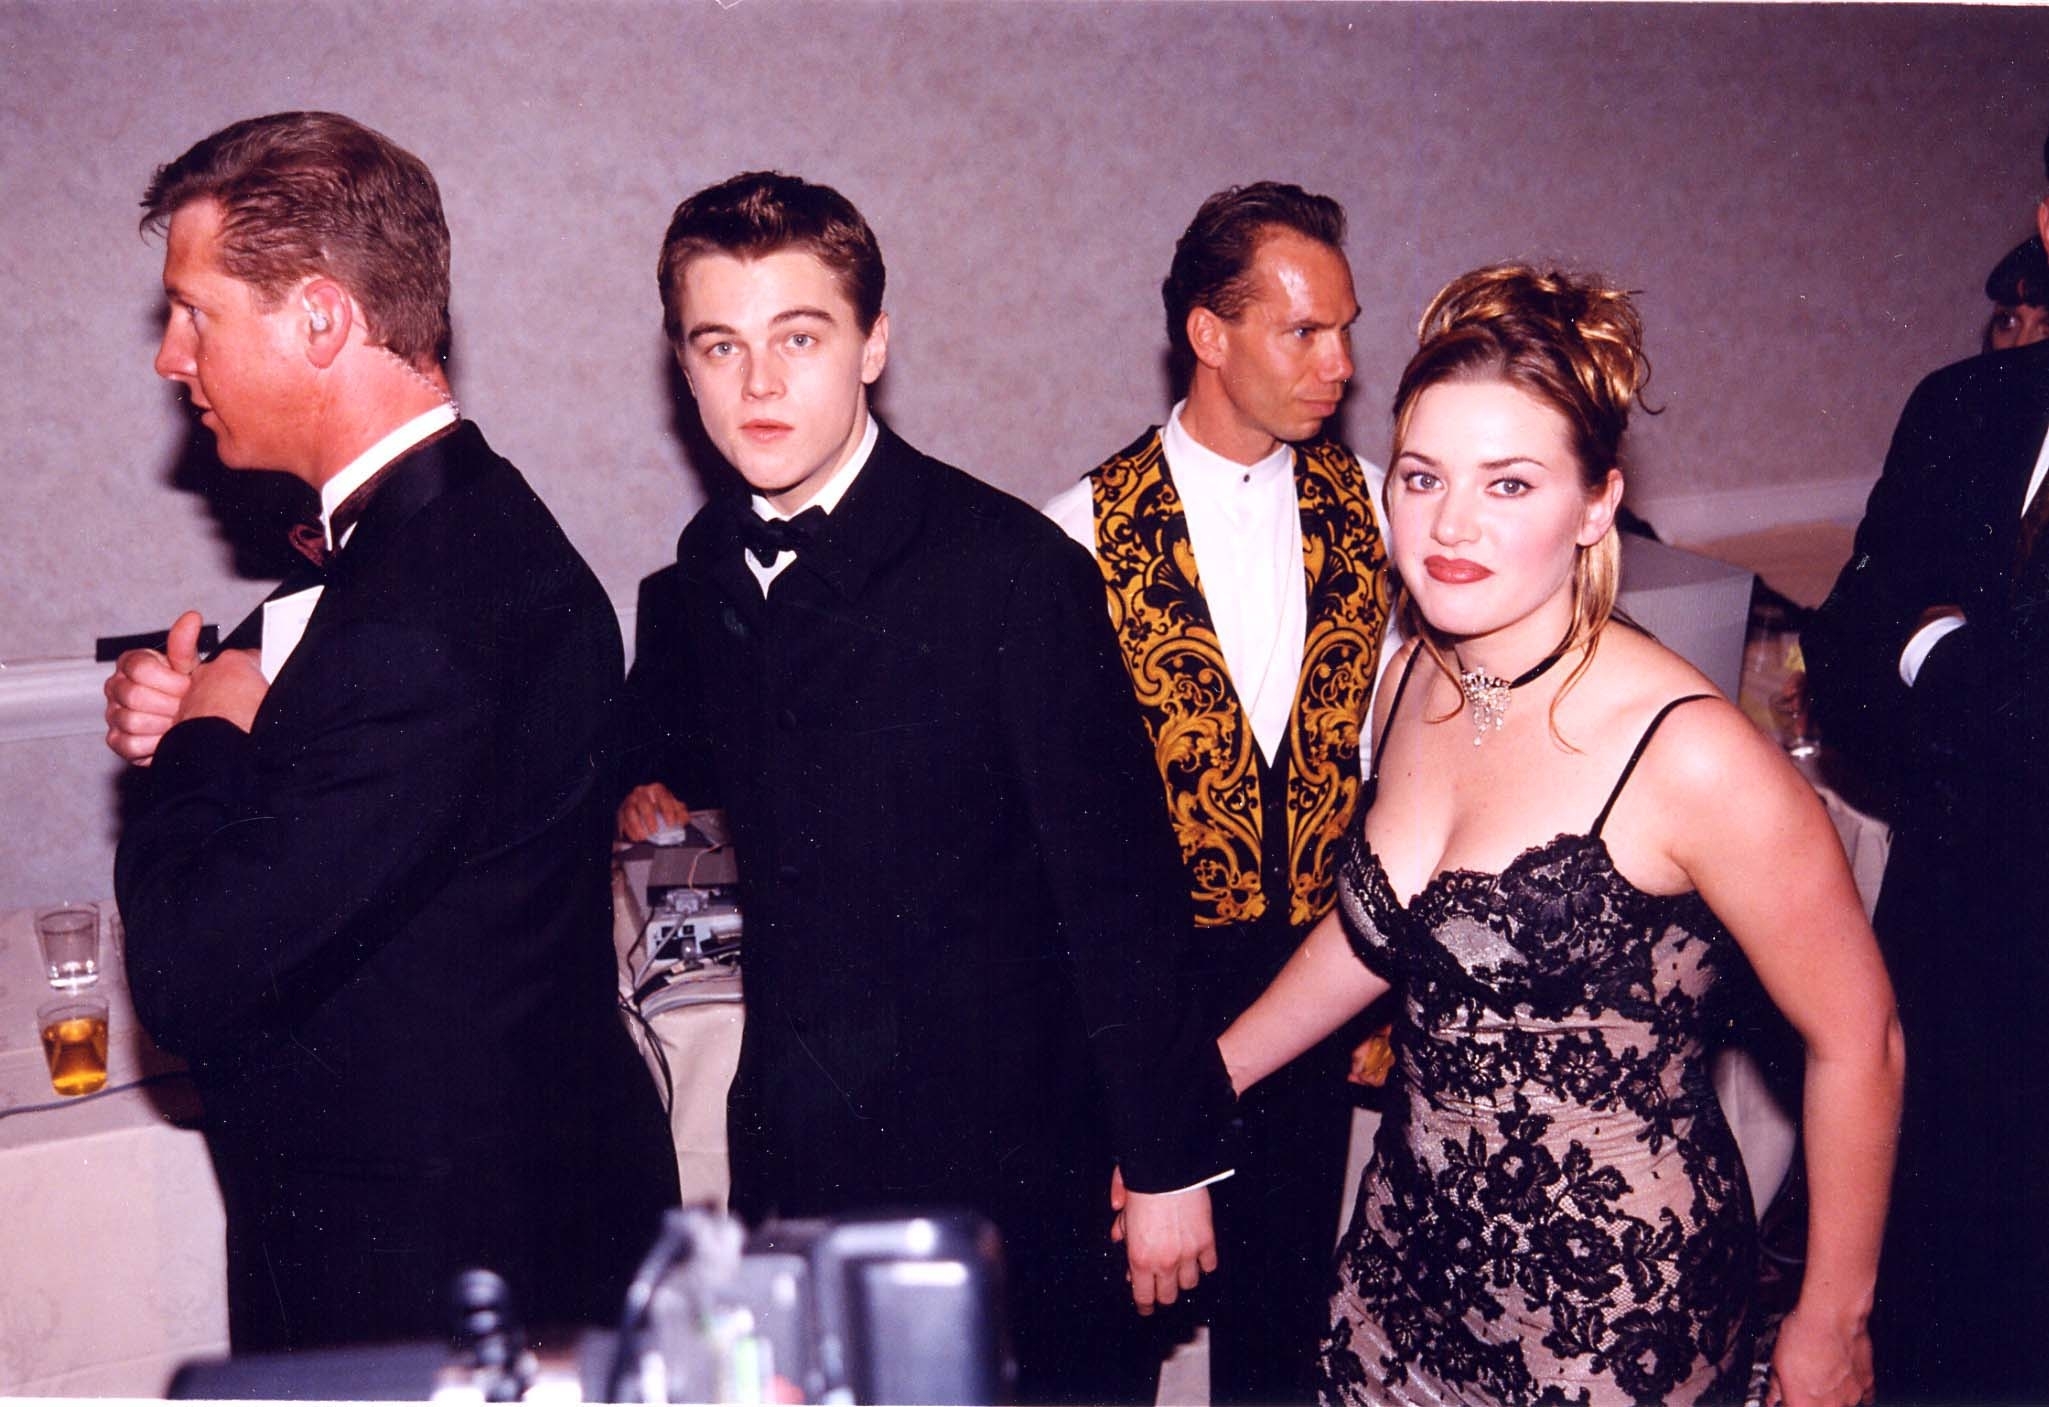 Kate and Leo holding hands around the time of Titanic